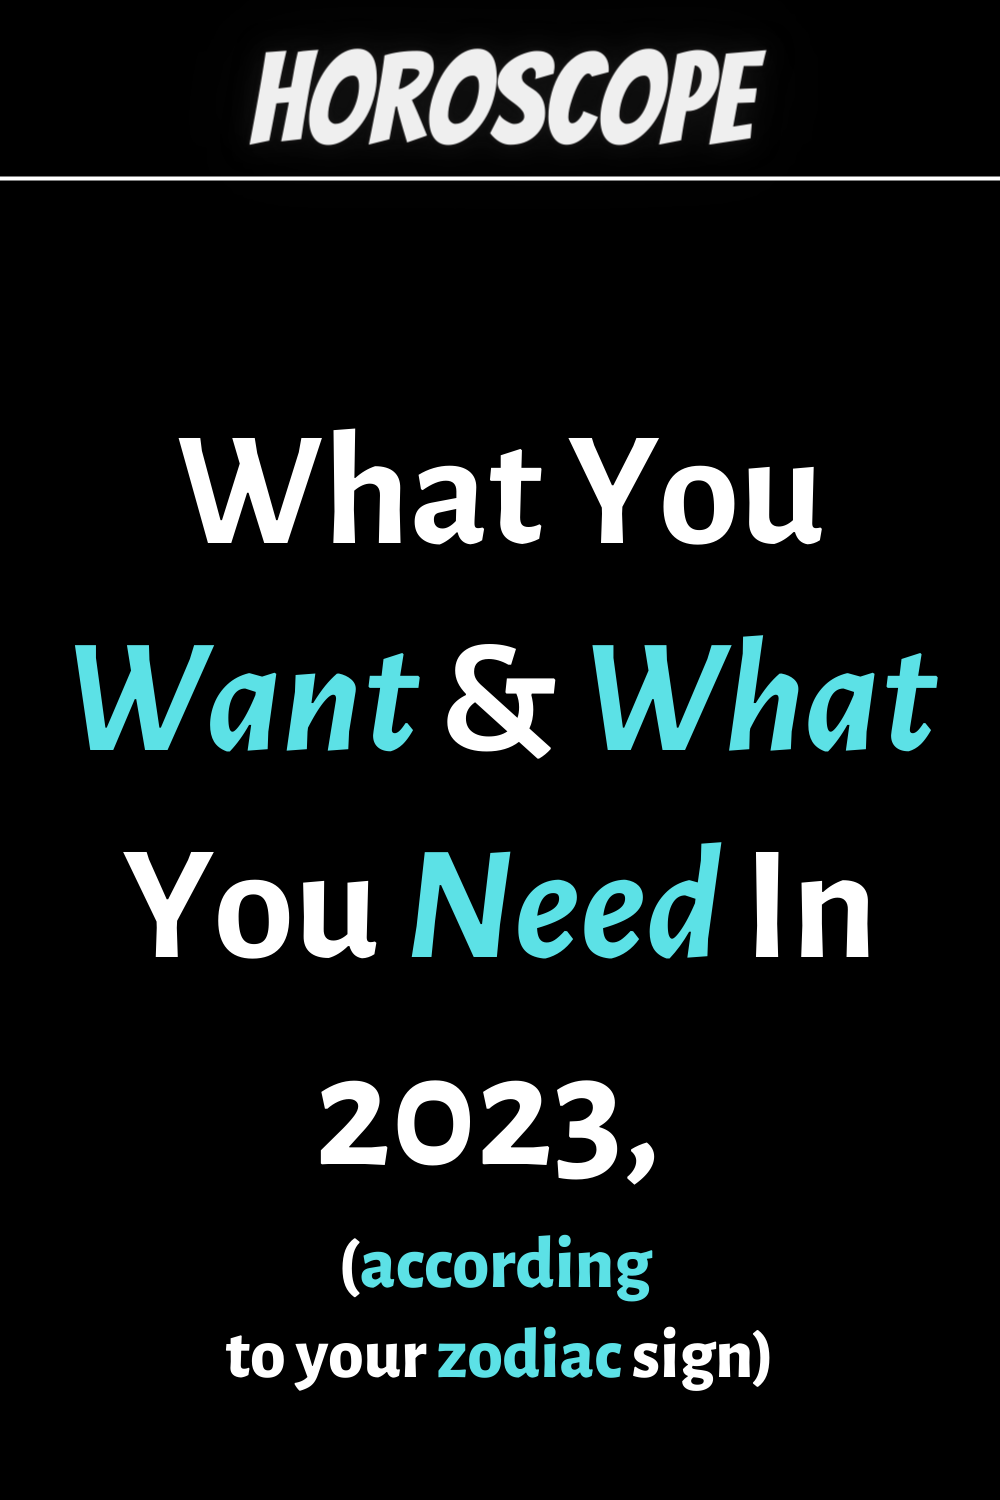 What You Want & What You Need In 2023, Based On Your Zodiac Sign